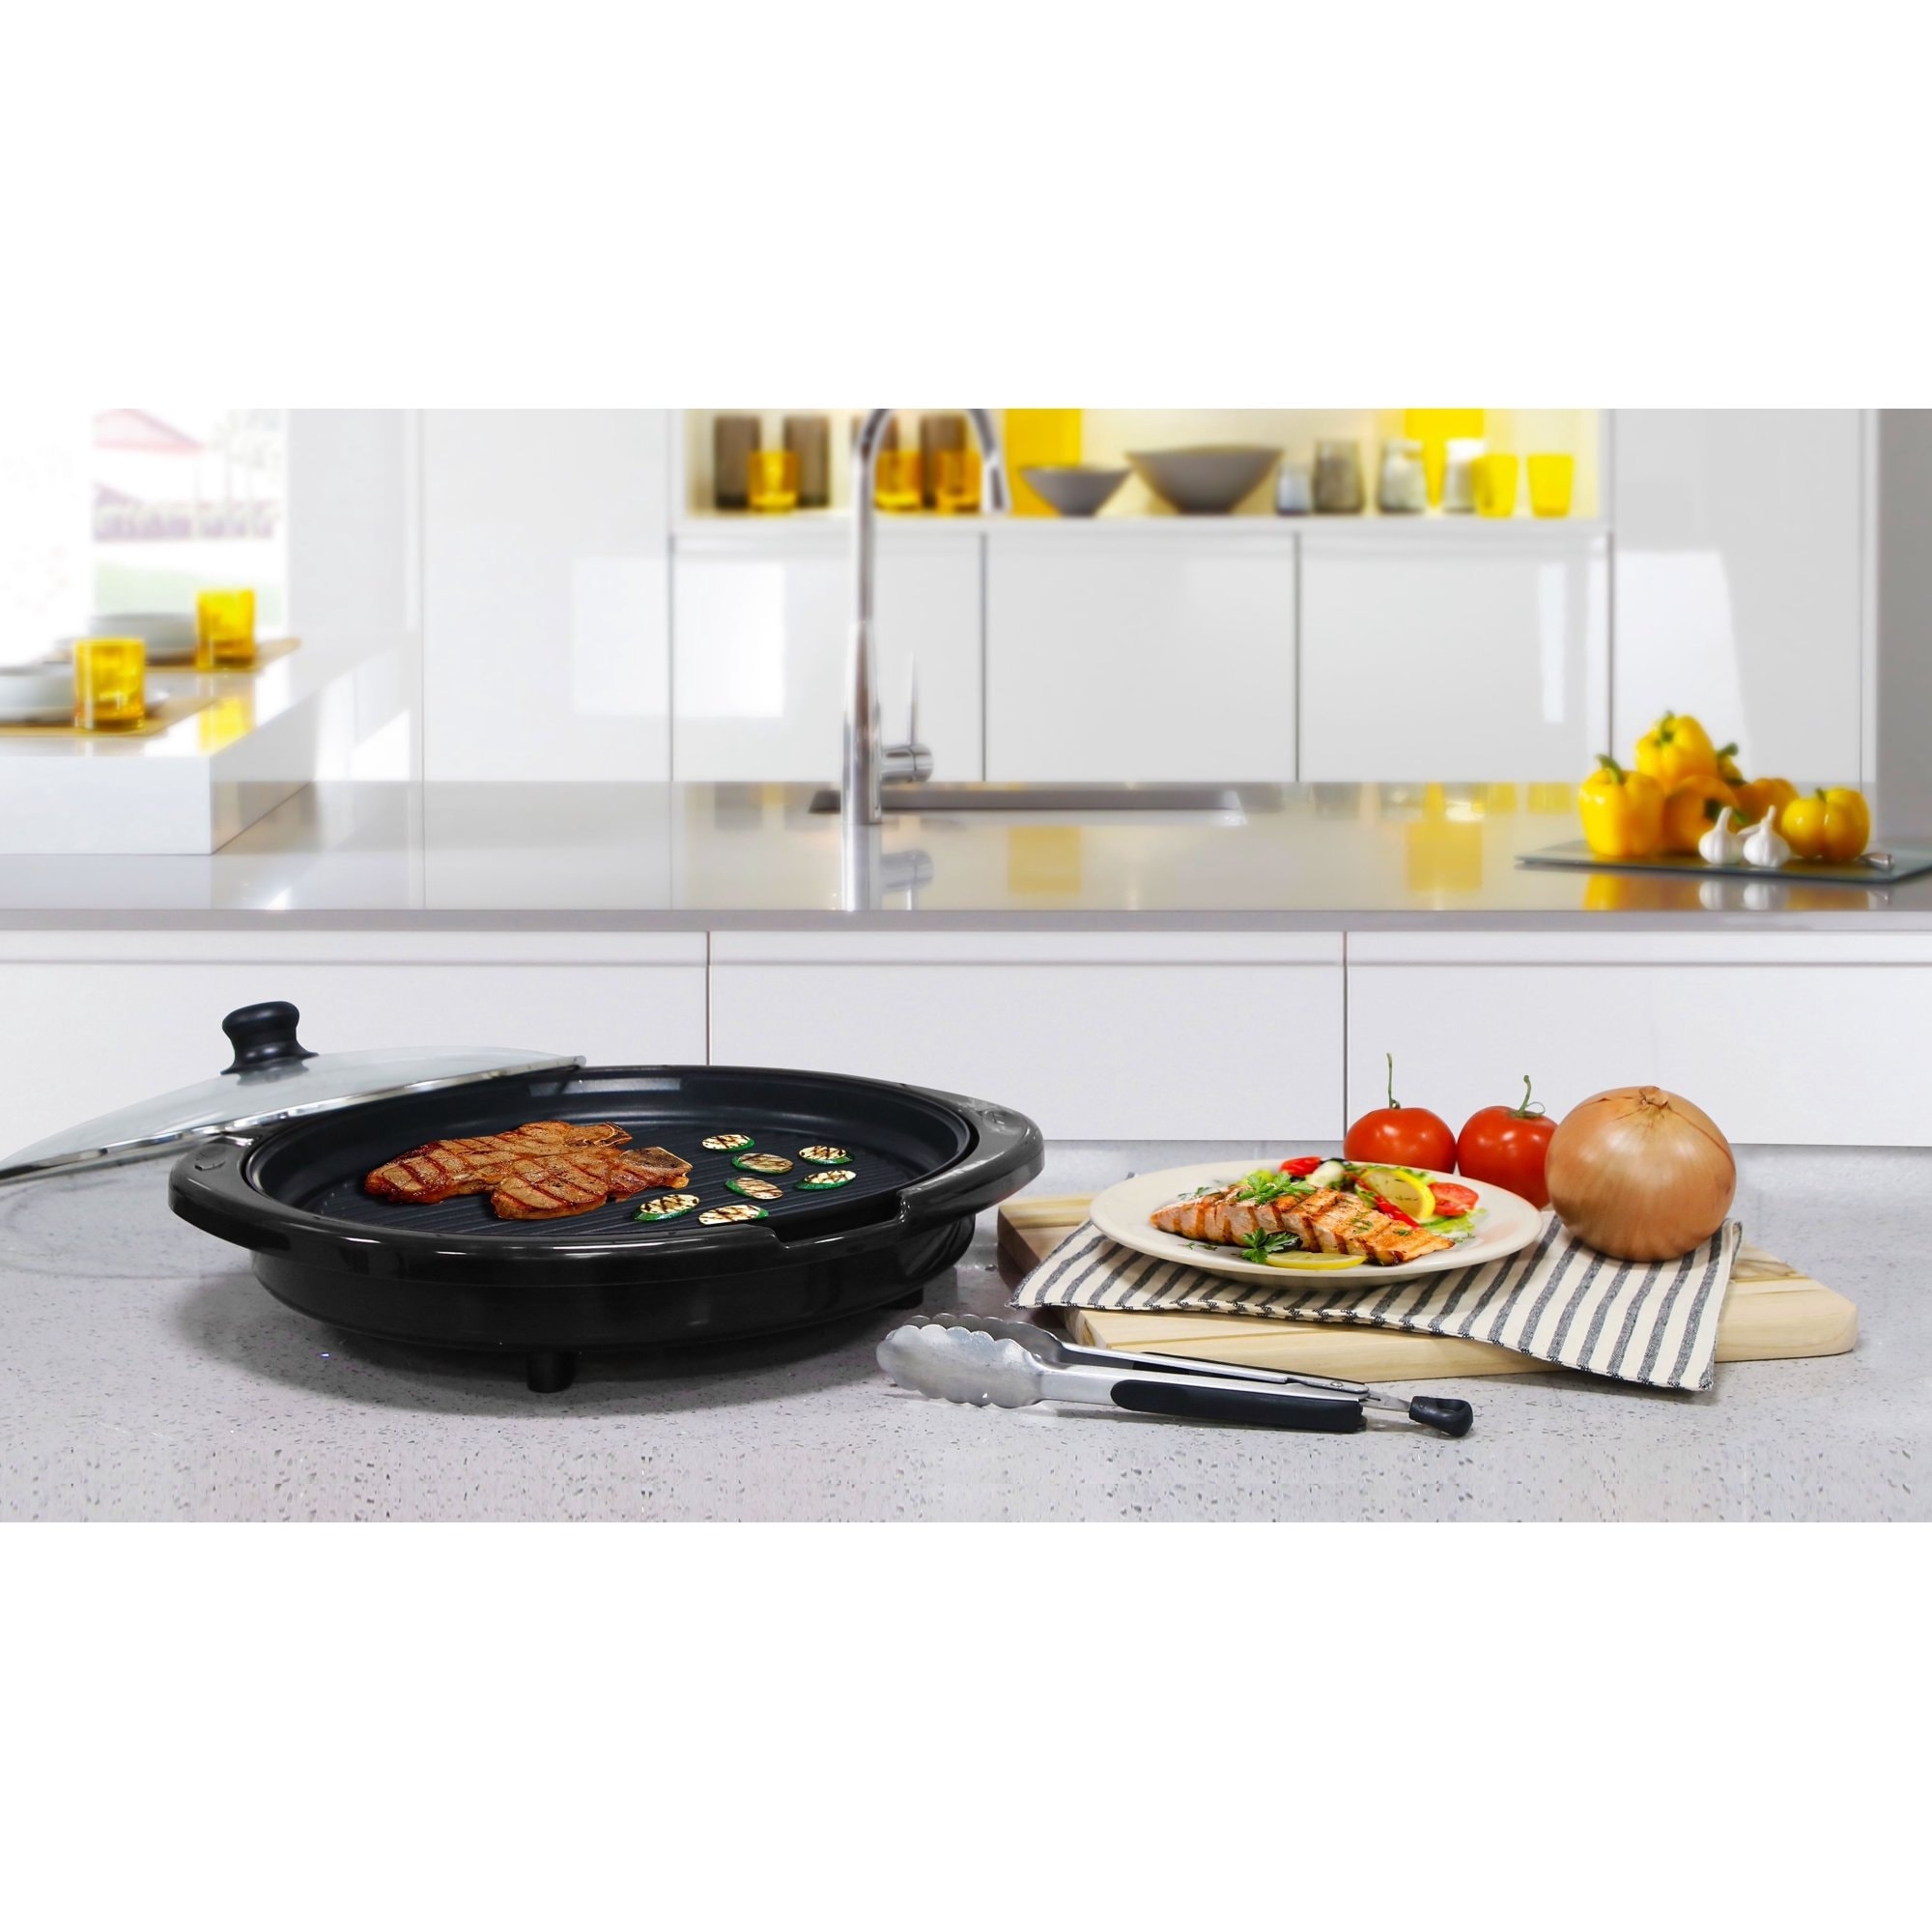 https://ak1.ostkcdn.com/images/products/is/images/direct/aad119b4ea27330e937892cdb26449c442a14778/Electric-Indoor-Grill%2C-Black.jpg